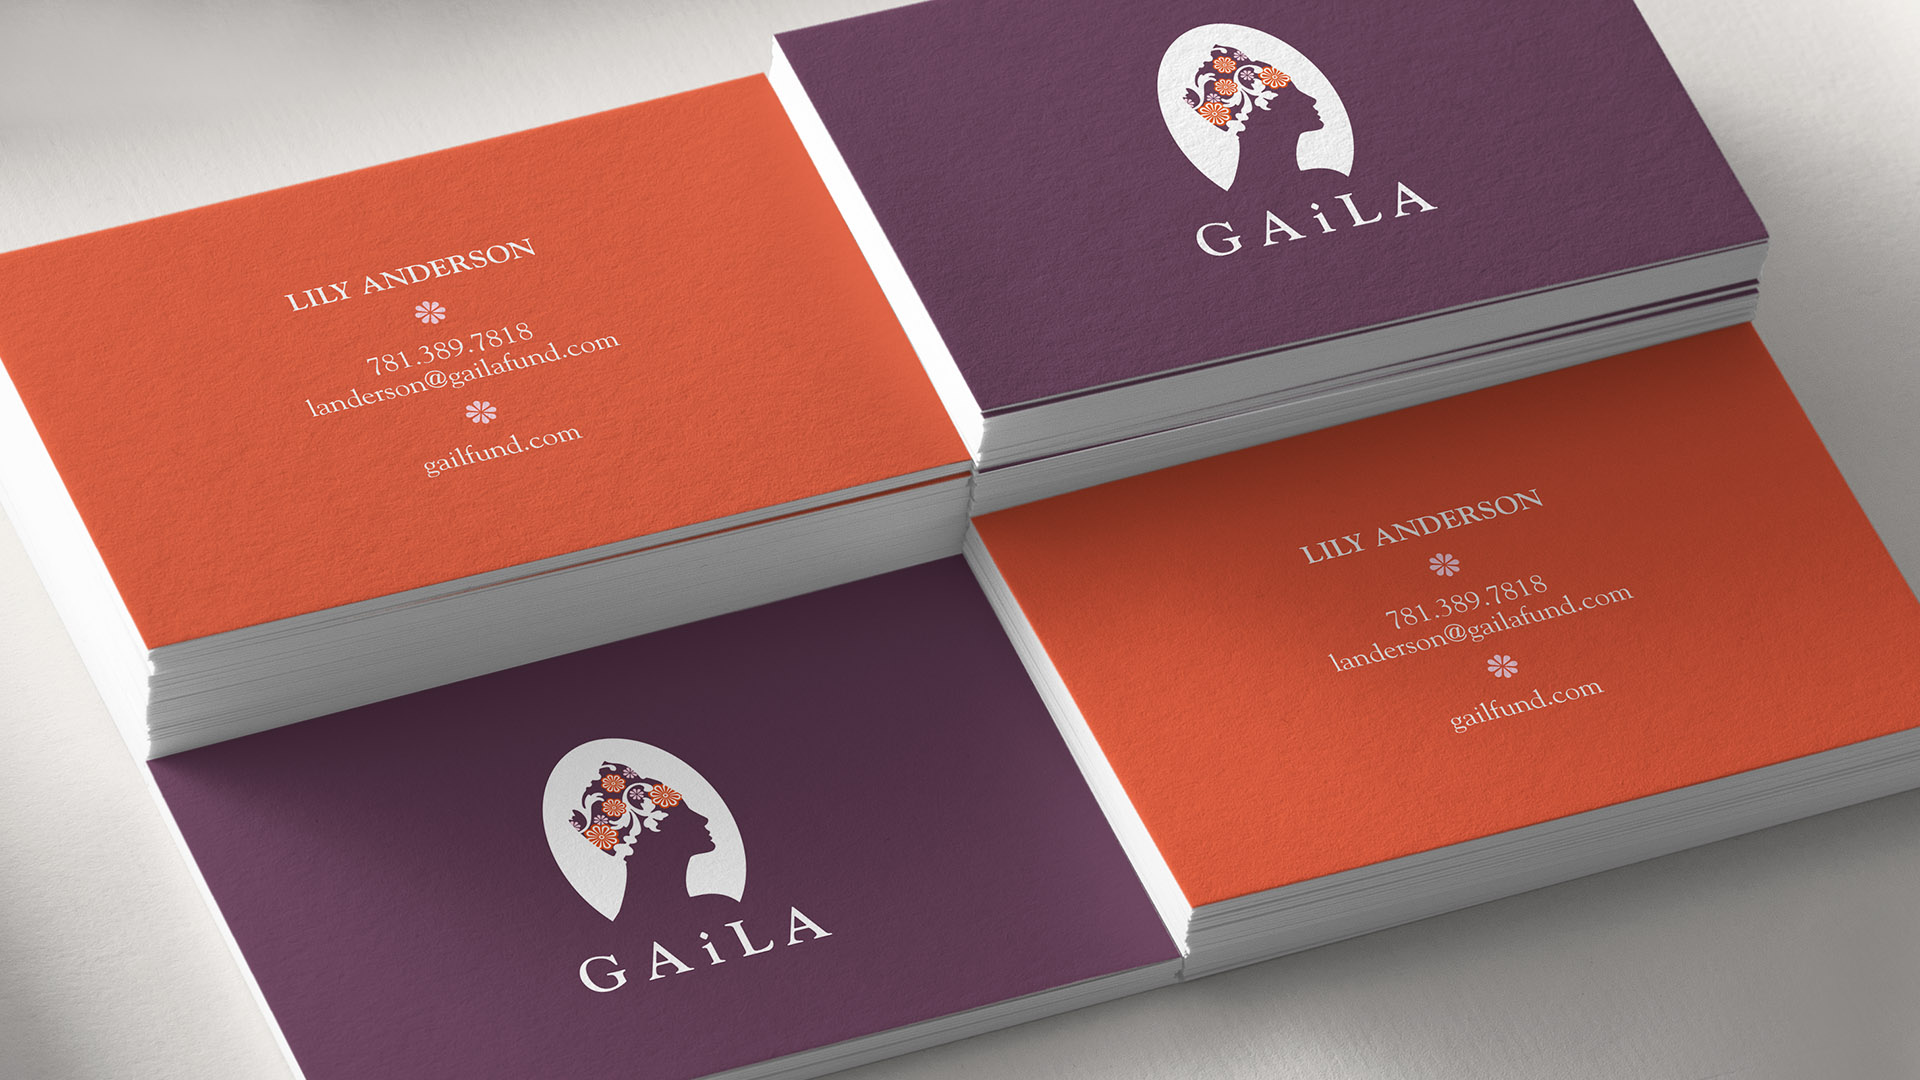 the gaila fund business cards stacked